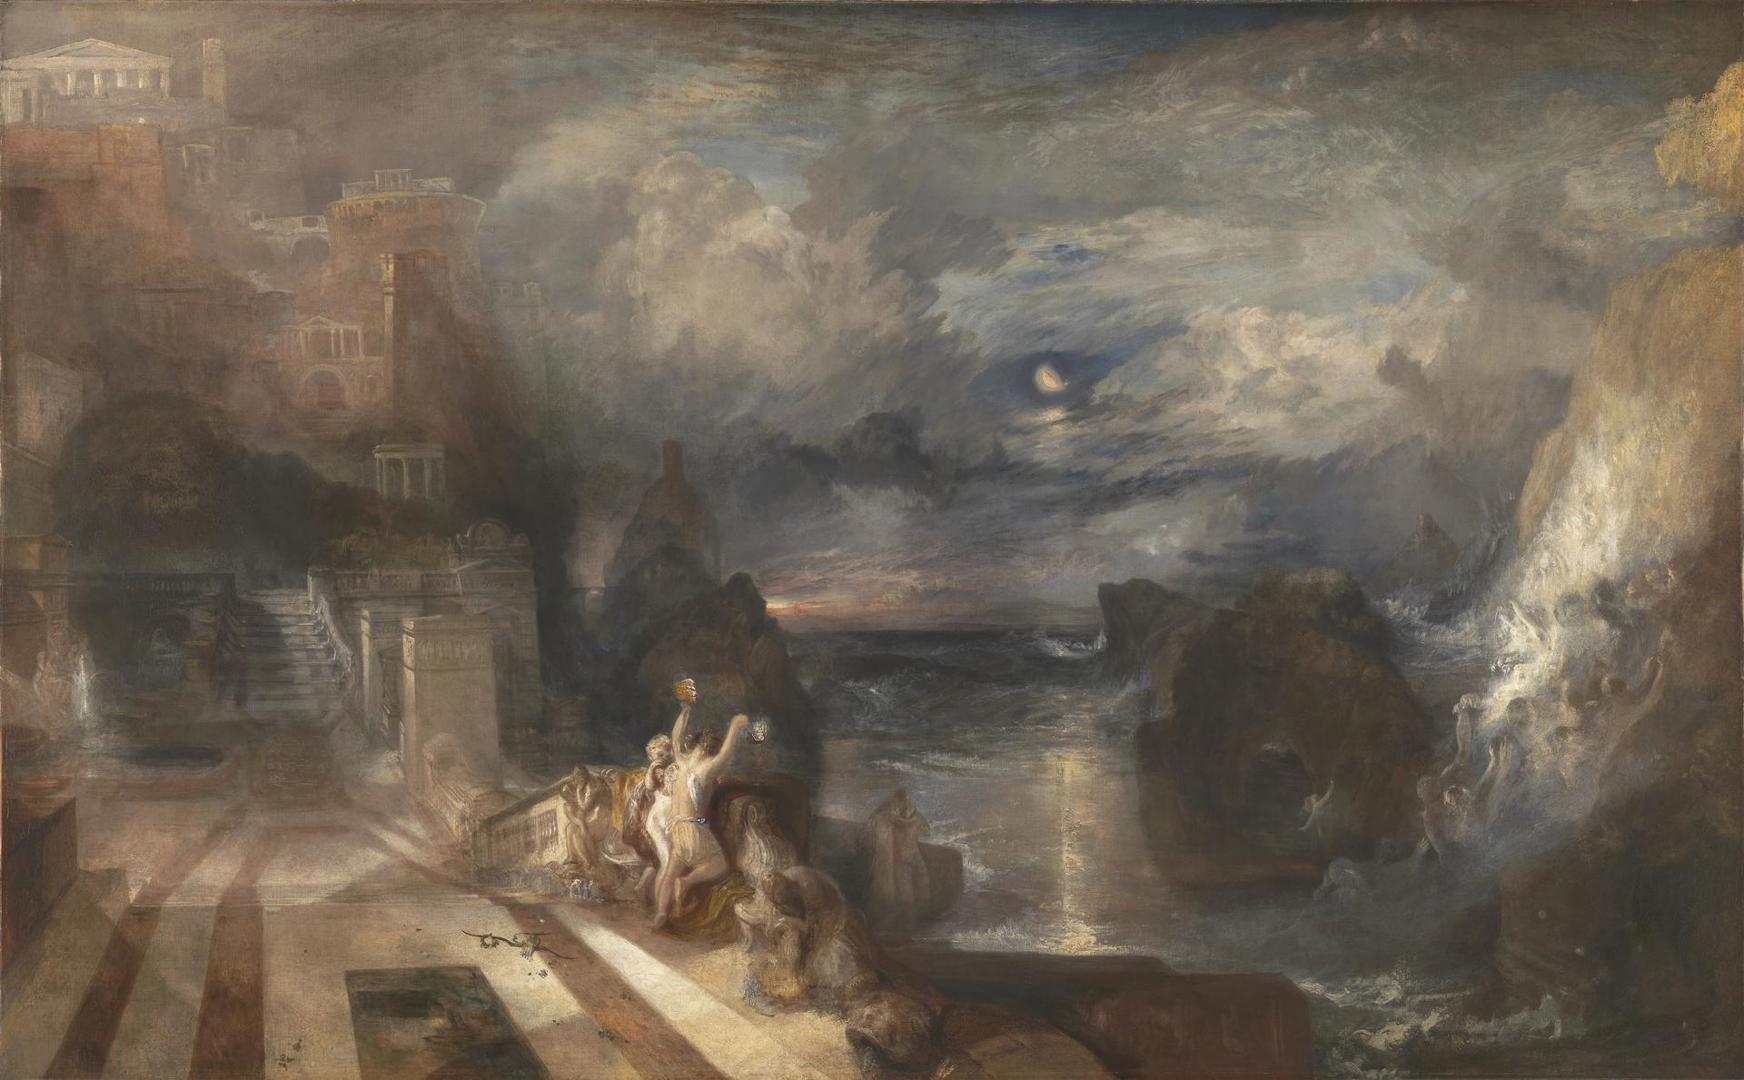 The Parting of Hero and Leander by Joseph Mallord William Turner